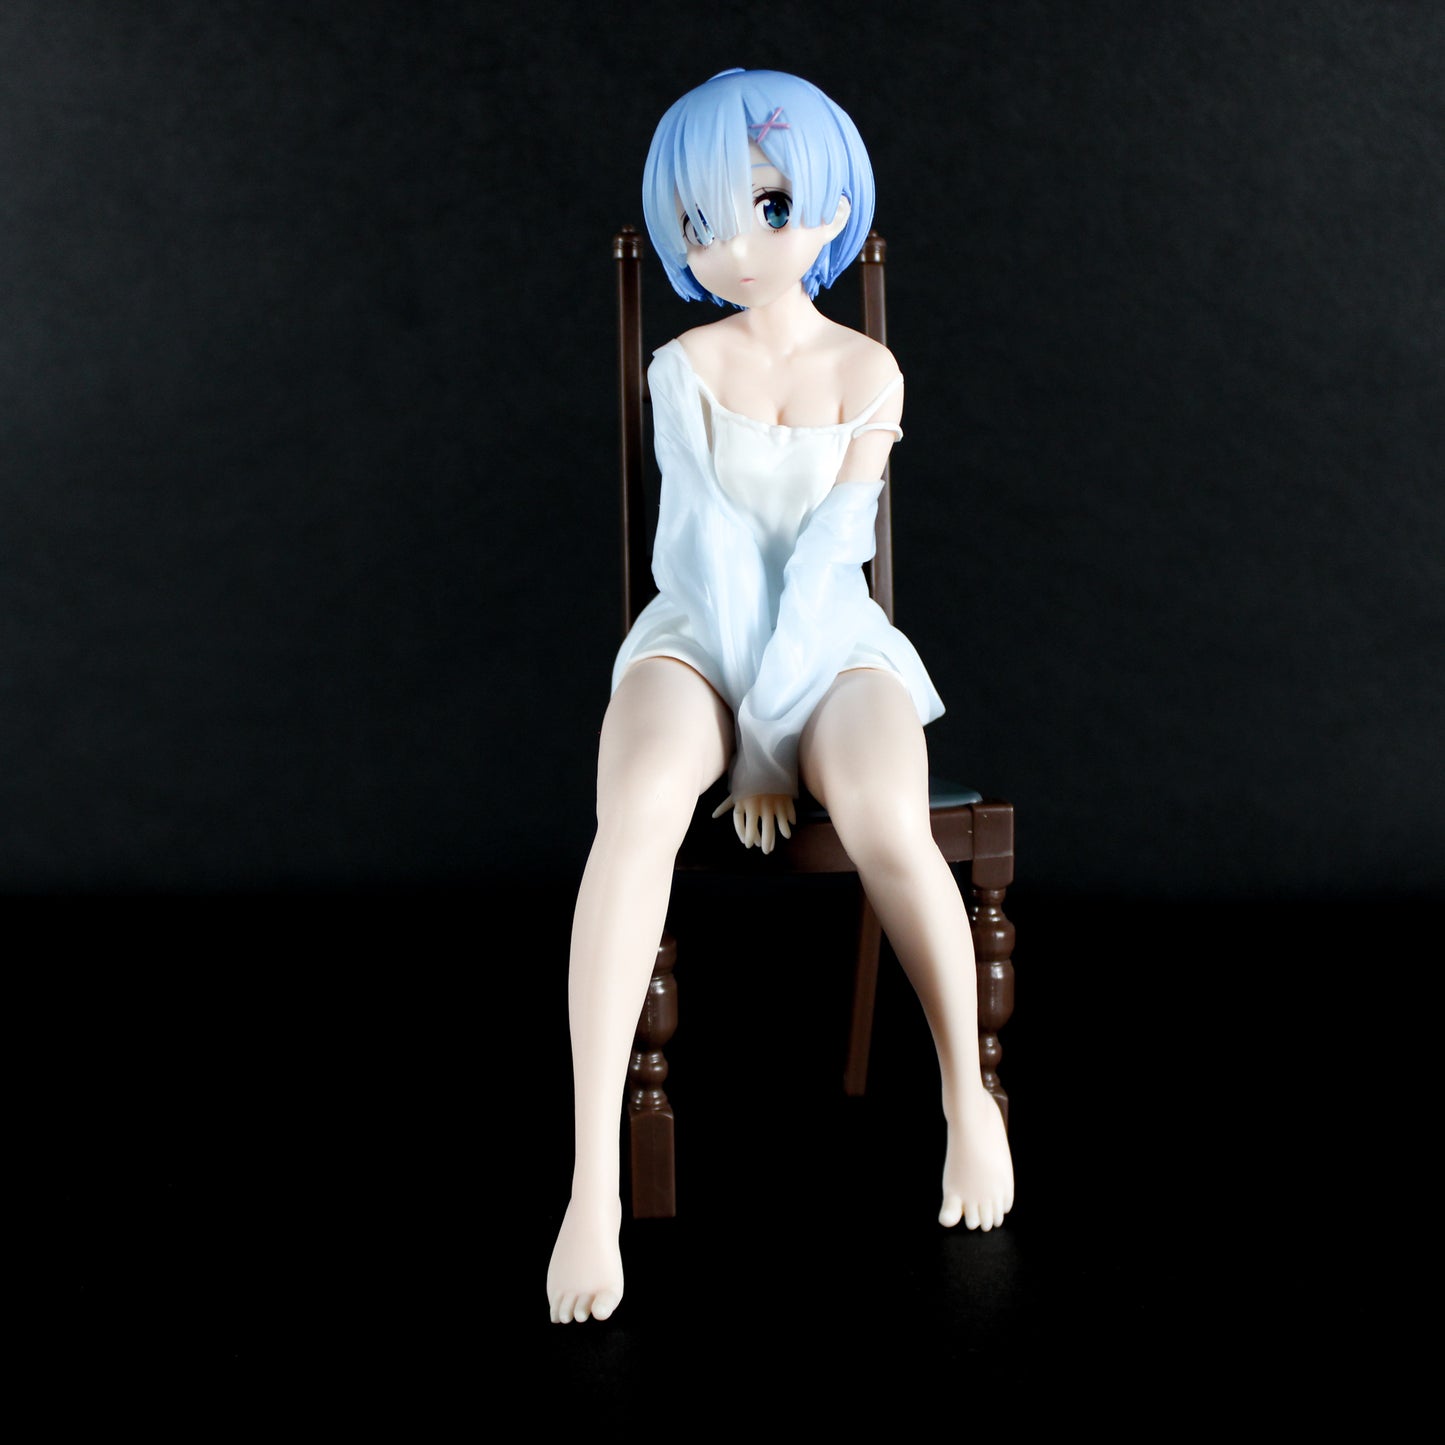 Load image into Gallery viewer, Rem: Re:Zero Starting Life in Another World Statue
